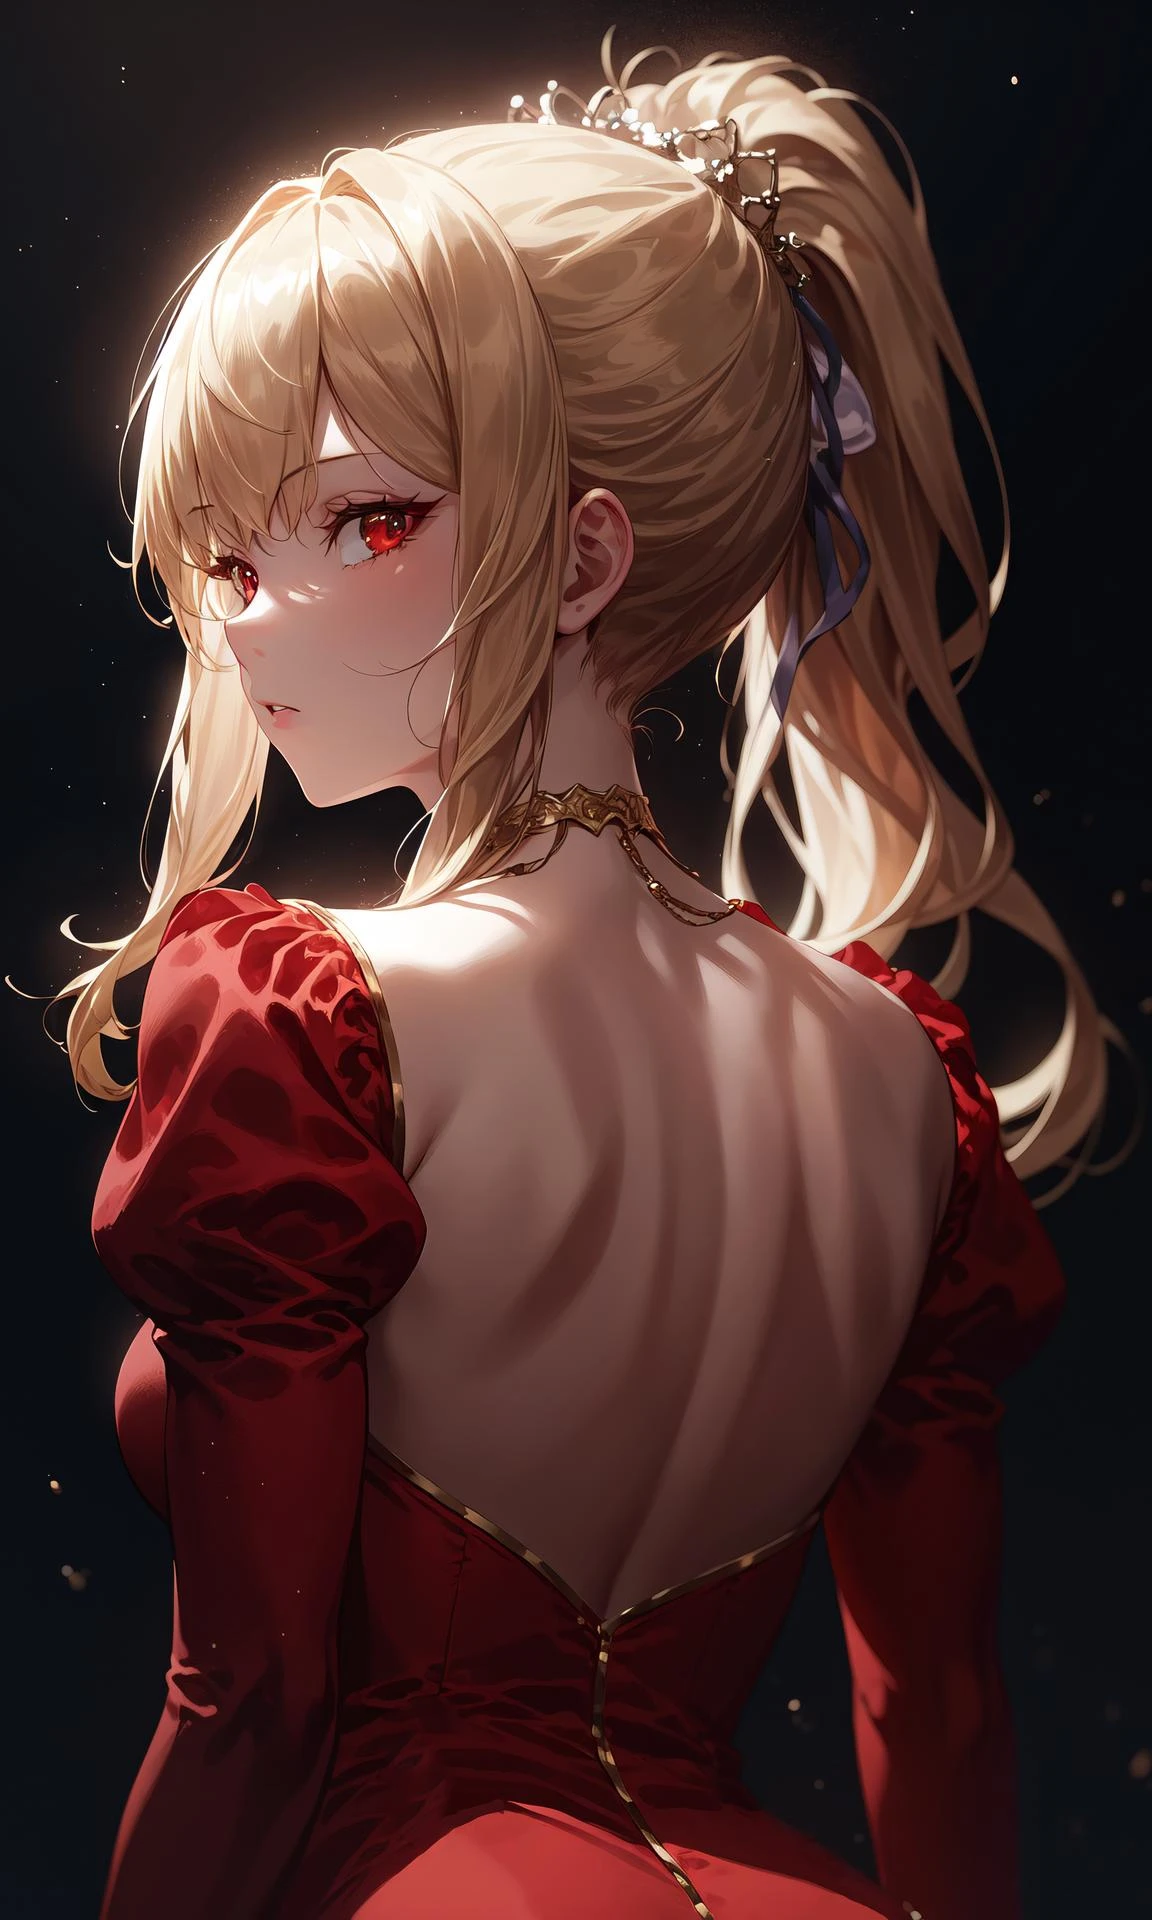 (masterpiece, best quality:1.2), extremely detailed, detailed hair, soft skin,

1girl, solo, standing, upper body, from behind,

blonde hair, long hair, high ponytail, long ponytail,

red eyes, long eyelashes, thick eyelashes, looking at viewer,

red dress, backless dress, ornate dress, puffy skirt, long skirt, puffy sleeves, juliet sleeves, long sleeves,

nude,

black background,

